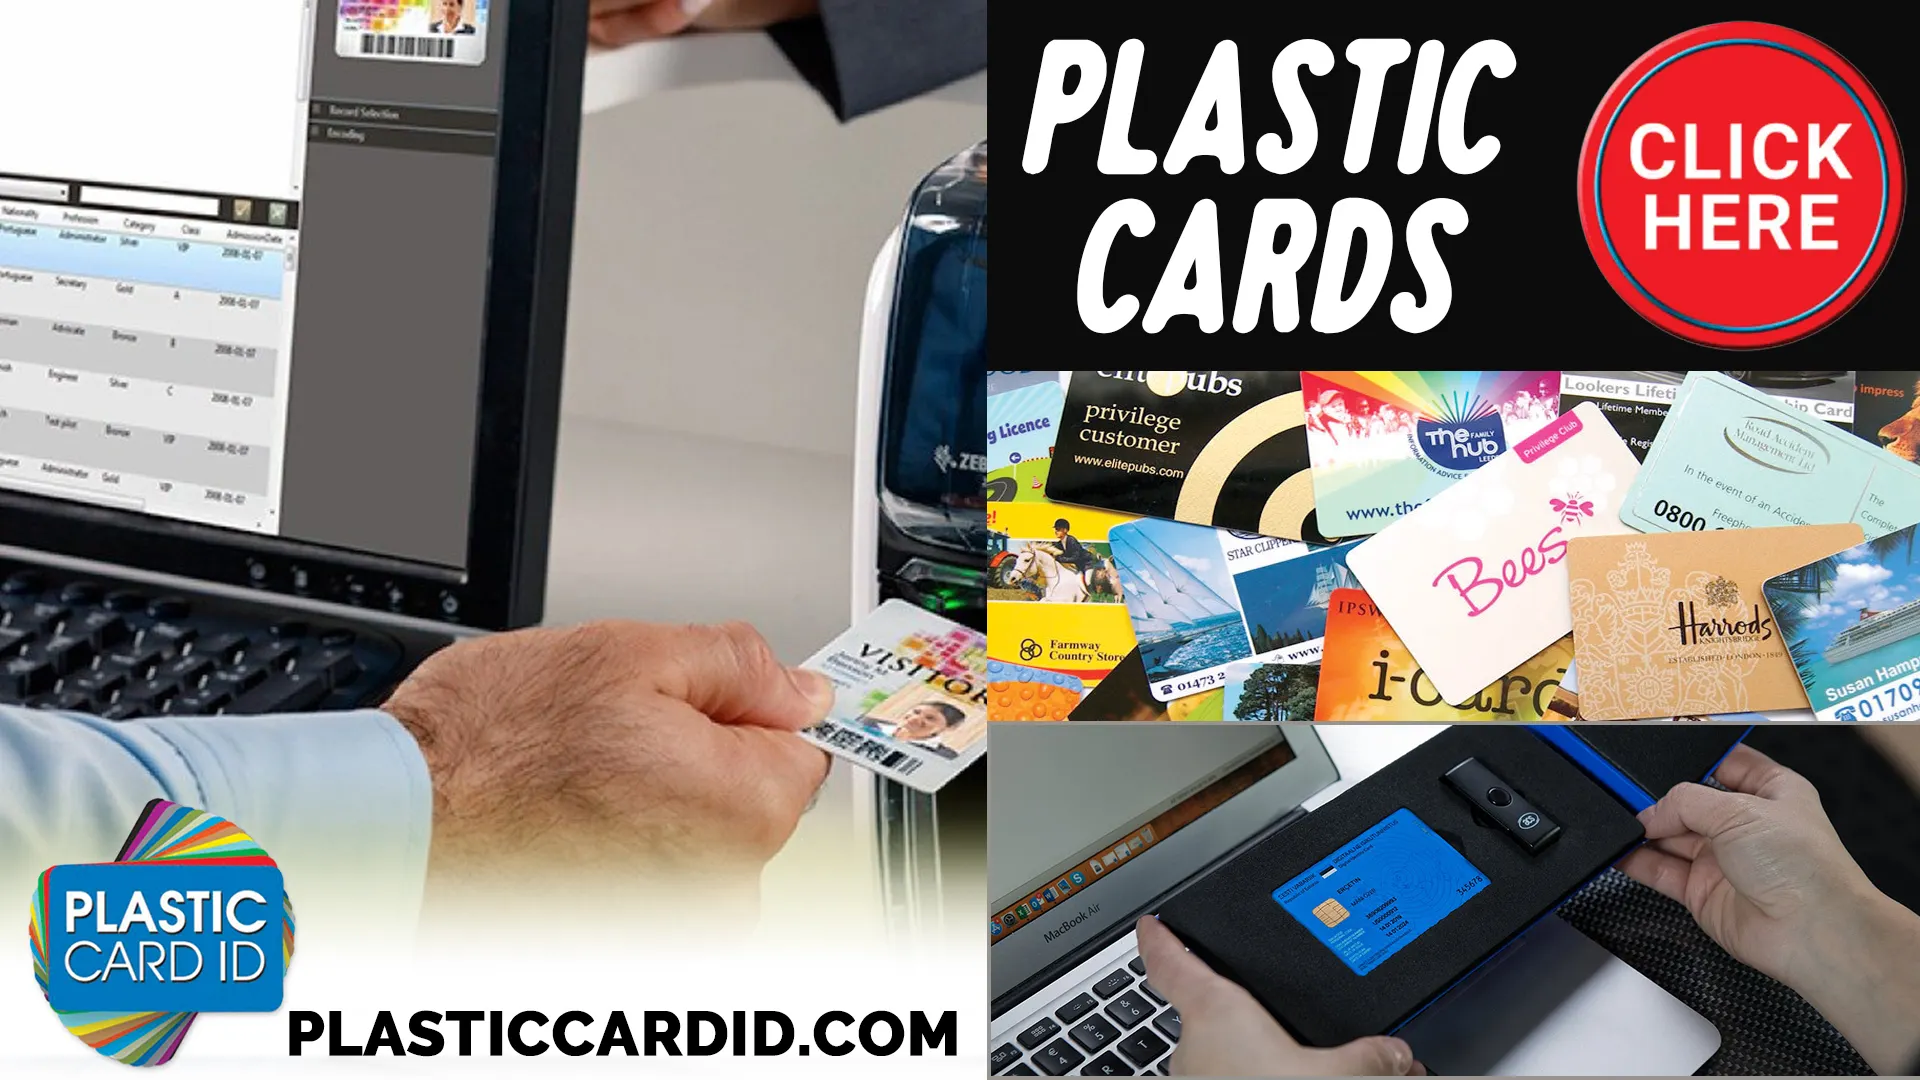 Advantages of Card Printing within Reach